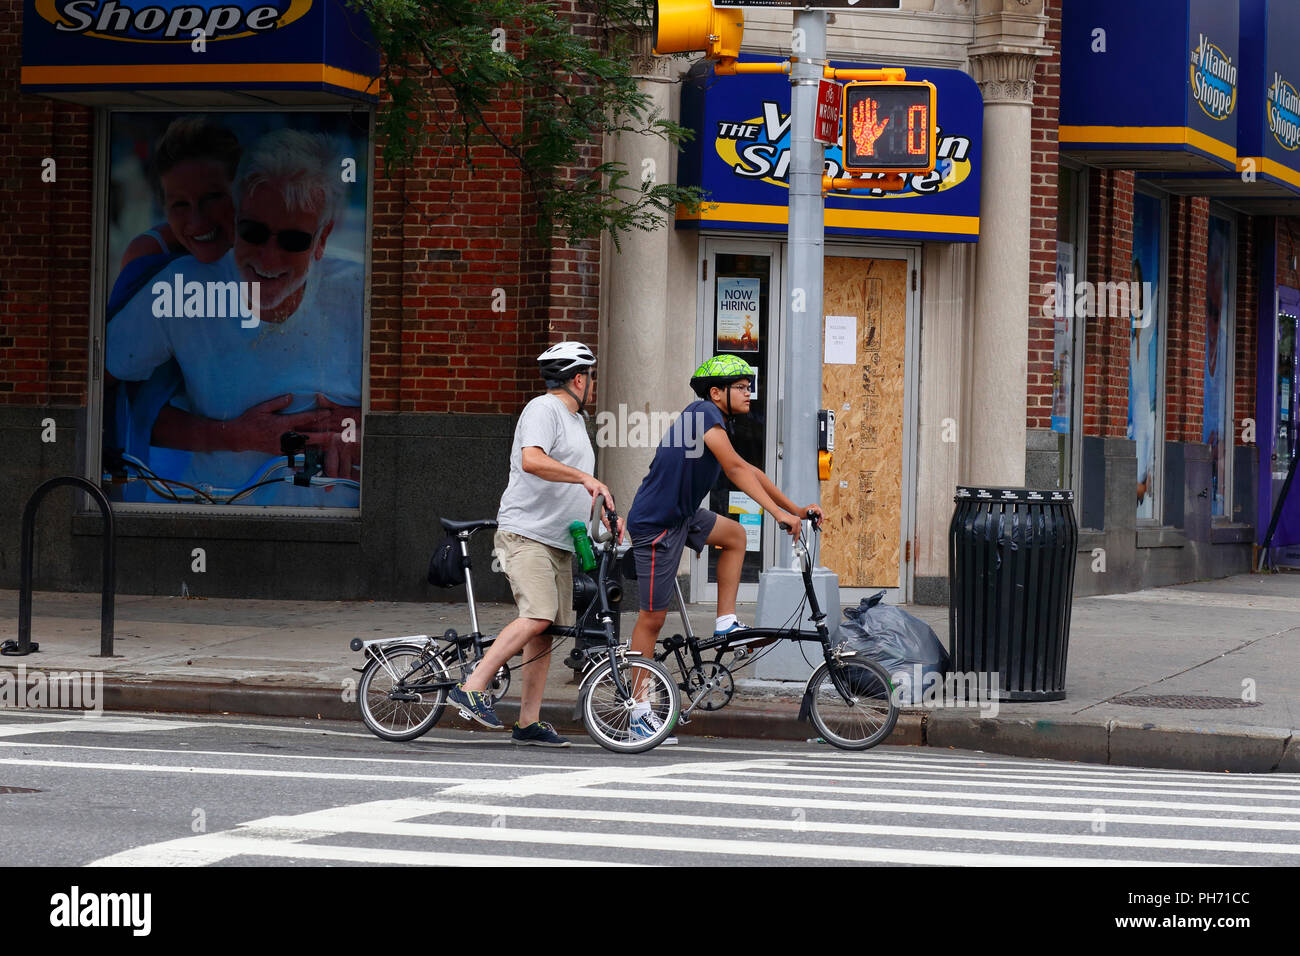 Cyclists on Brompton folding bicycles stopped at a traffic light Stock Photo